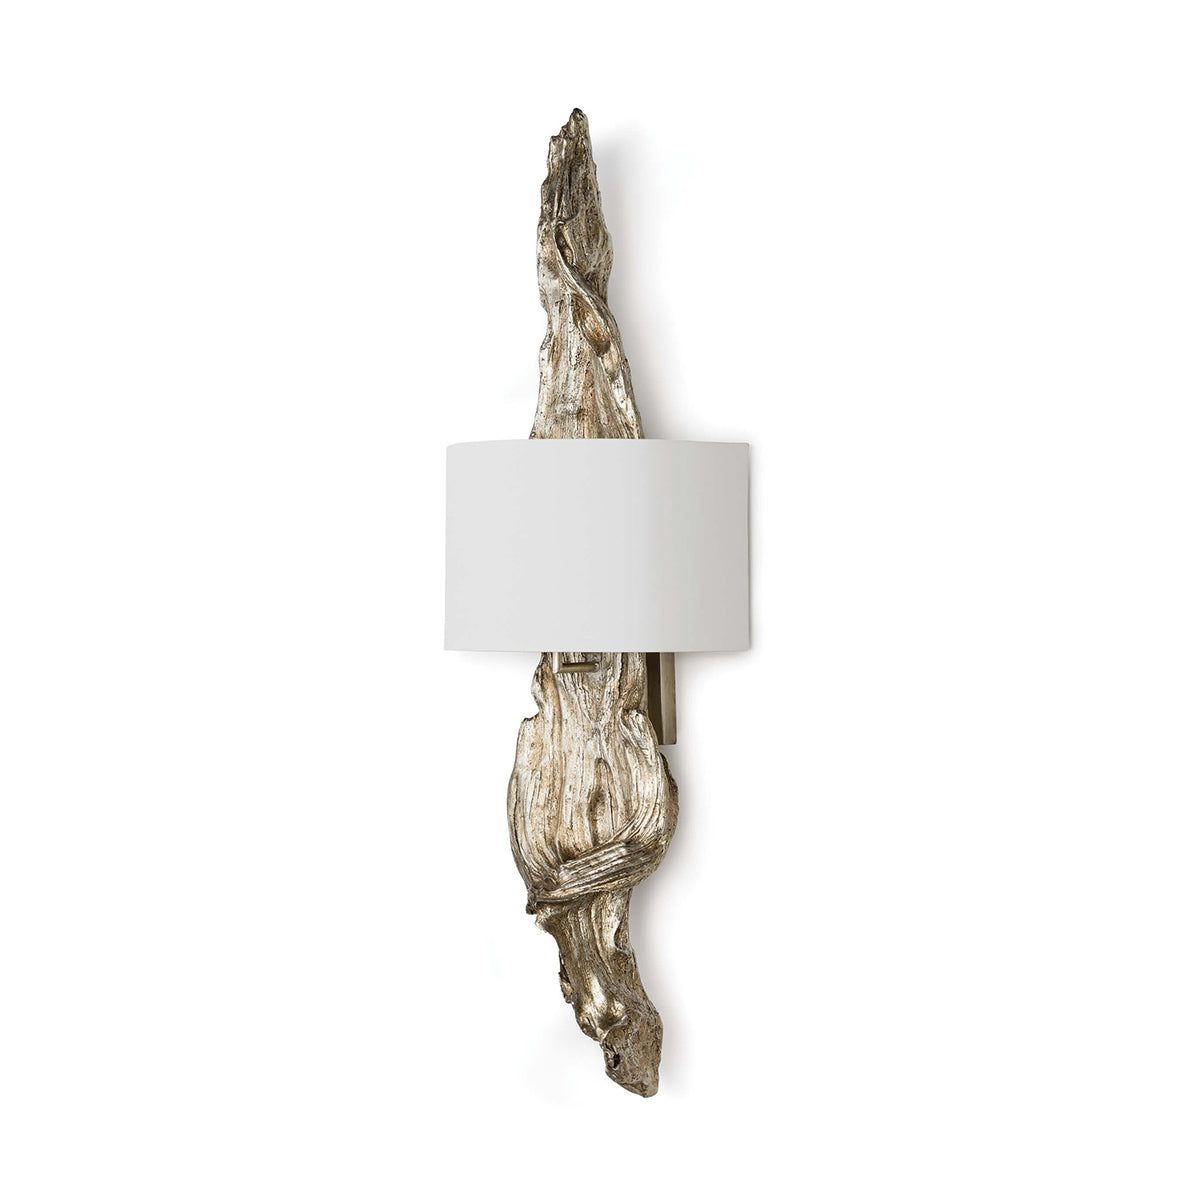 DRIFTWOOD SCONCE